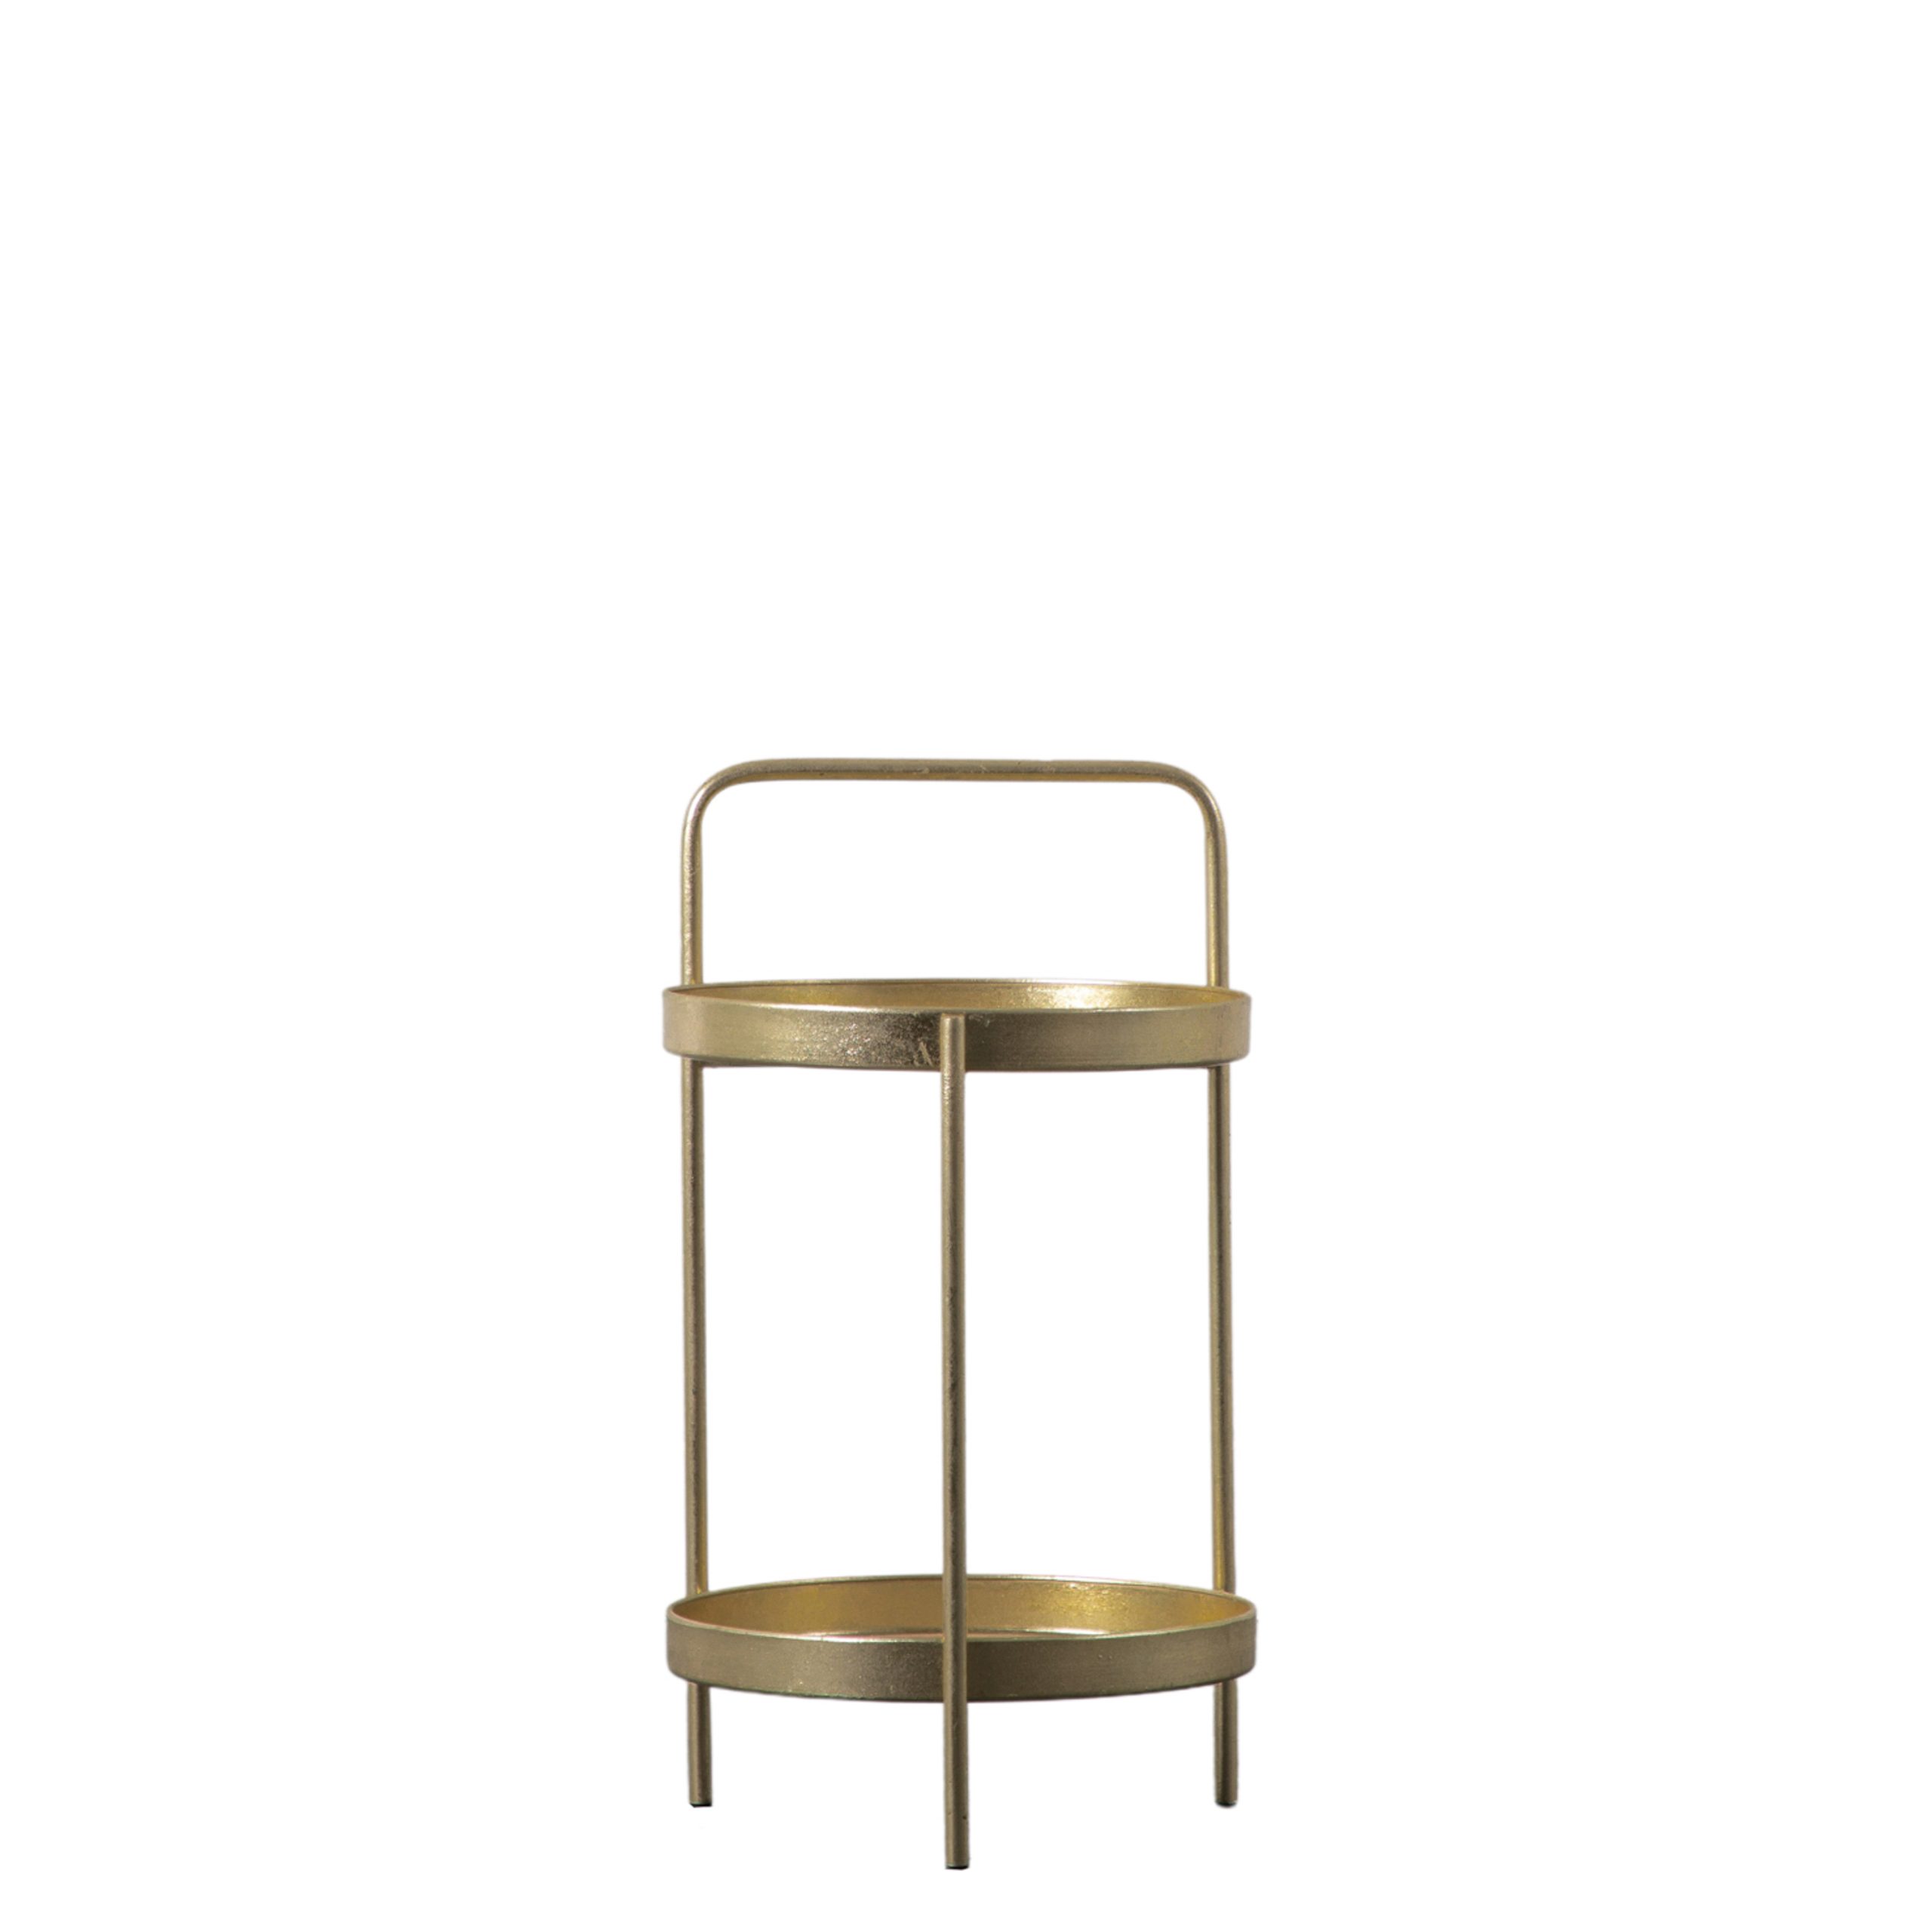 Gallery Direct Sennen Side Table Gold